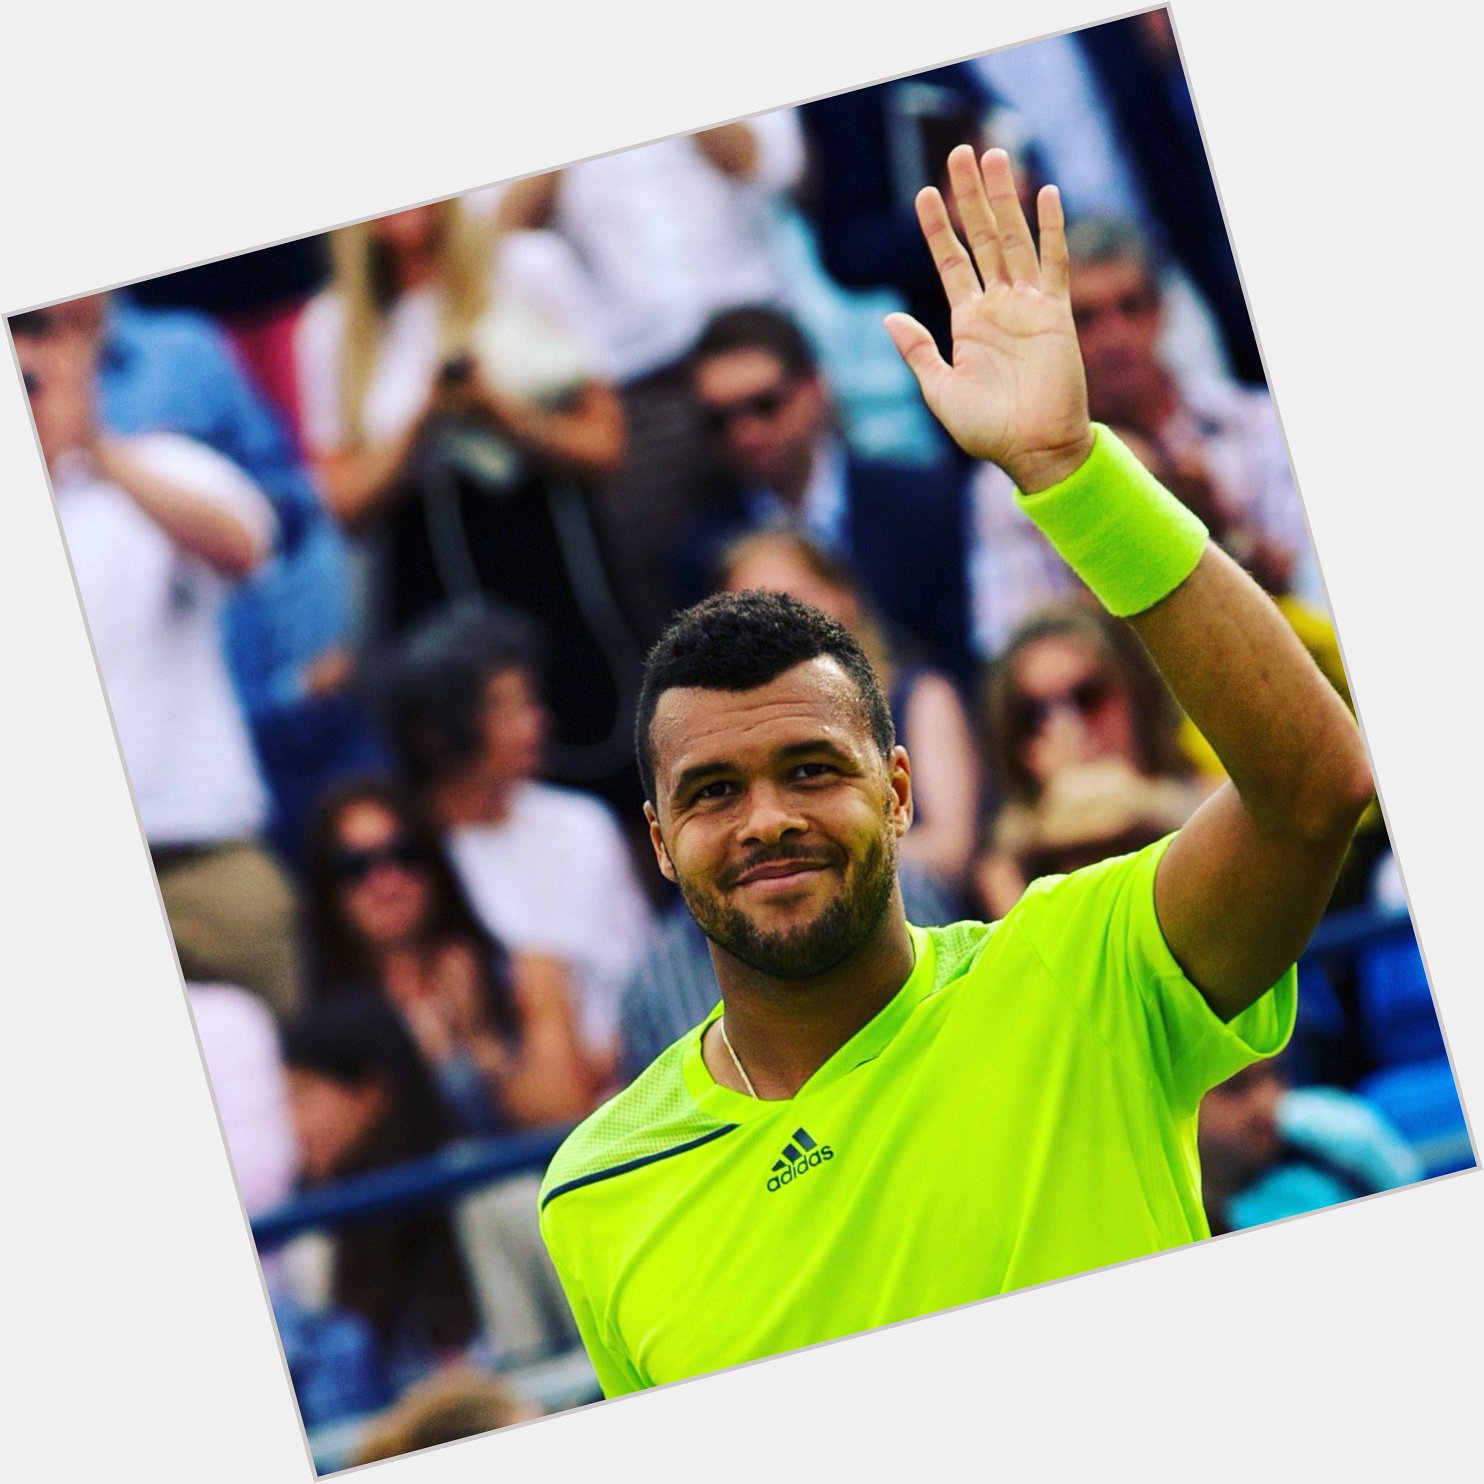 Happy birthday Jo Wilfried Tsonga !

Our 2011 runner-up and forever popular 